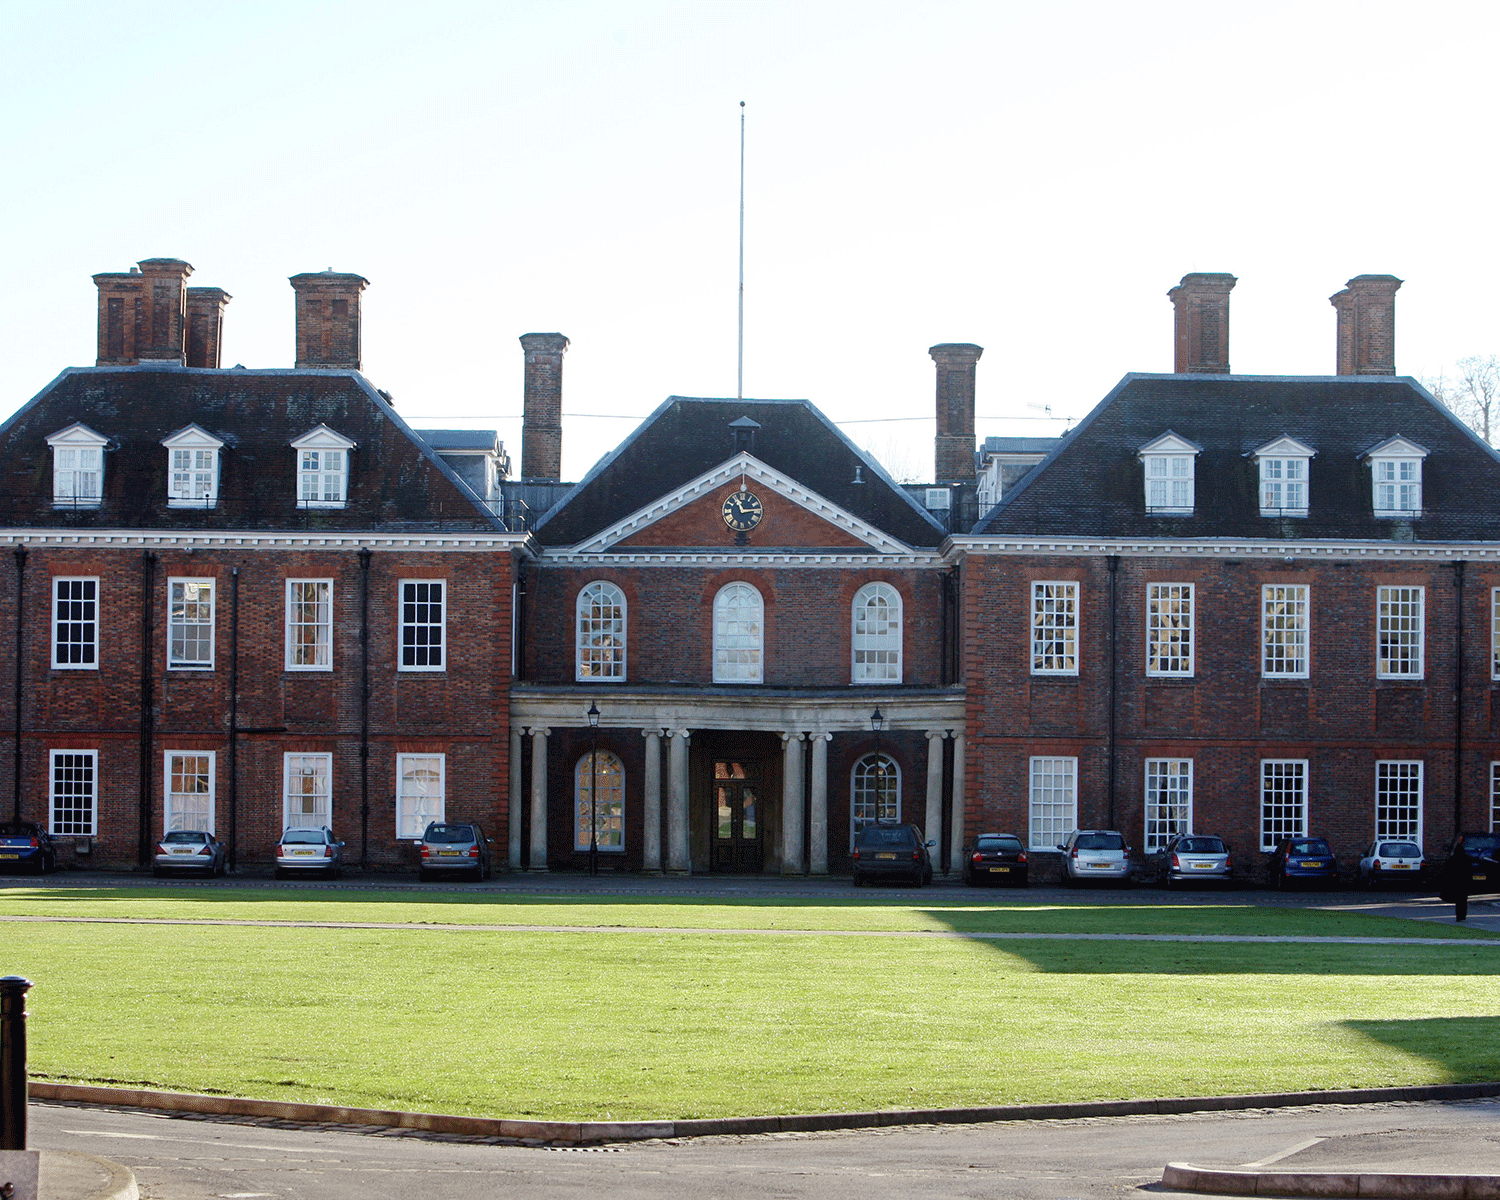 The private school was also attended by Samantha Cameron, the prime minister's wife